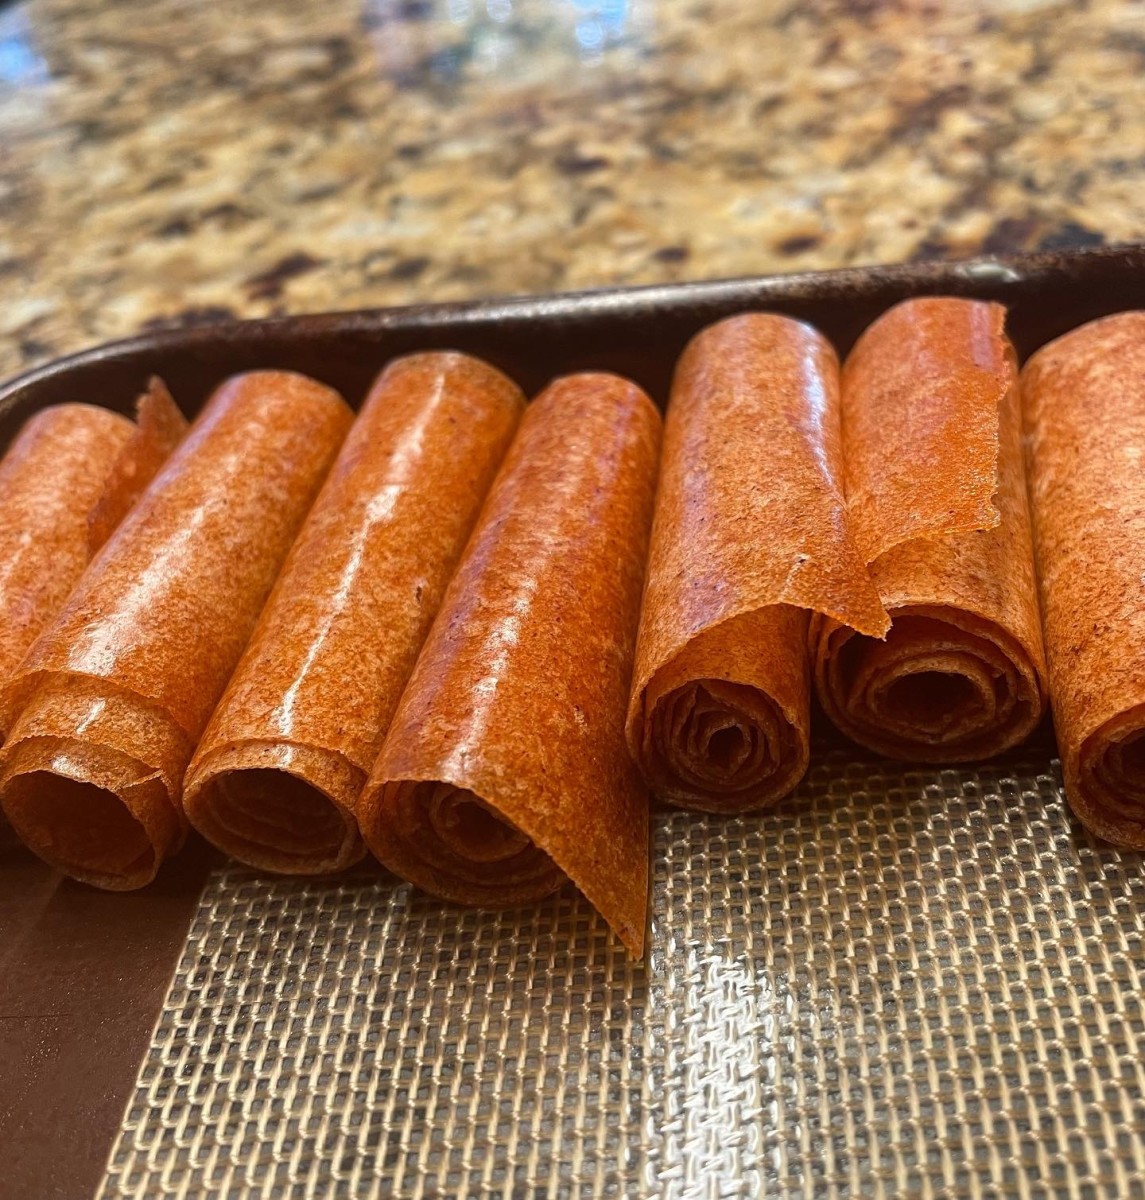 This fruit leather wasn't very sticky so I was able to roll it without parchment, but normally I would use parchment so that the fruit leather didn't stick to itself once rolled up.